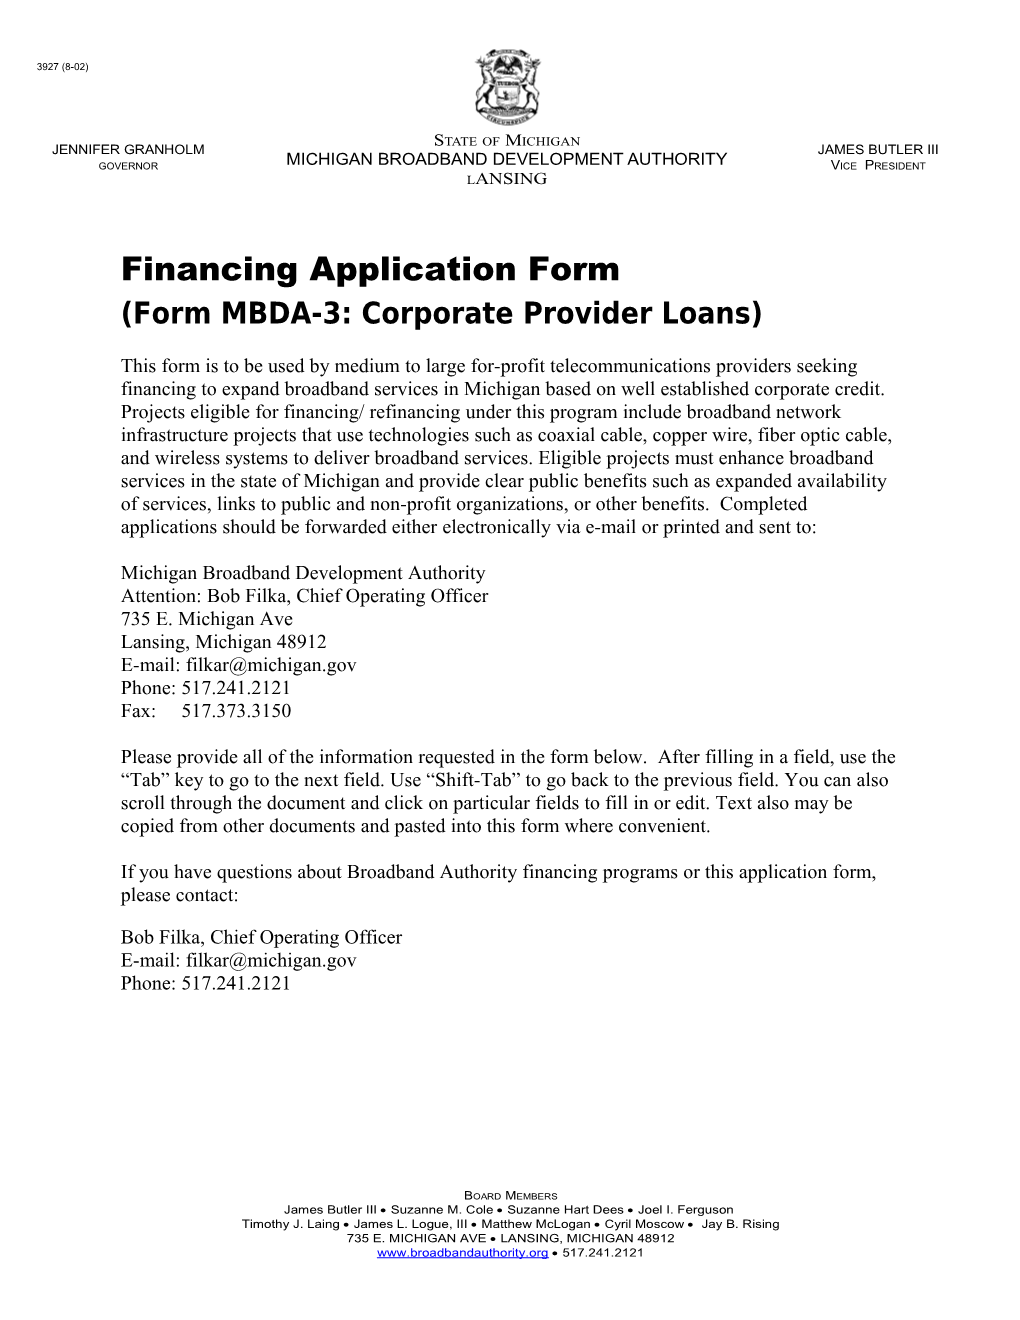 Page 6 Corporate Provider Application Form MBDA-3